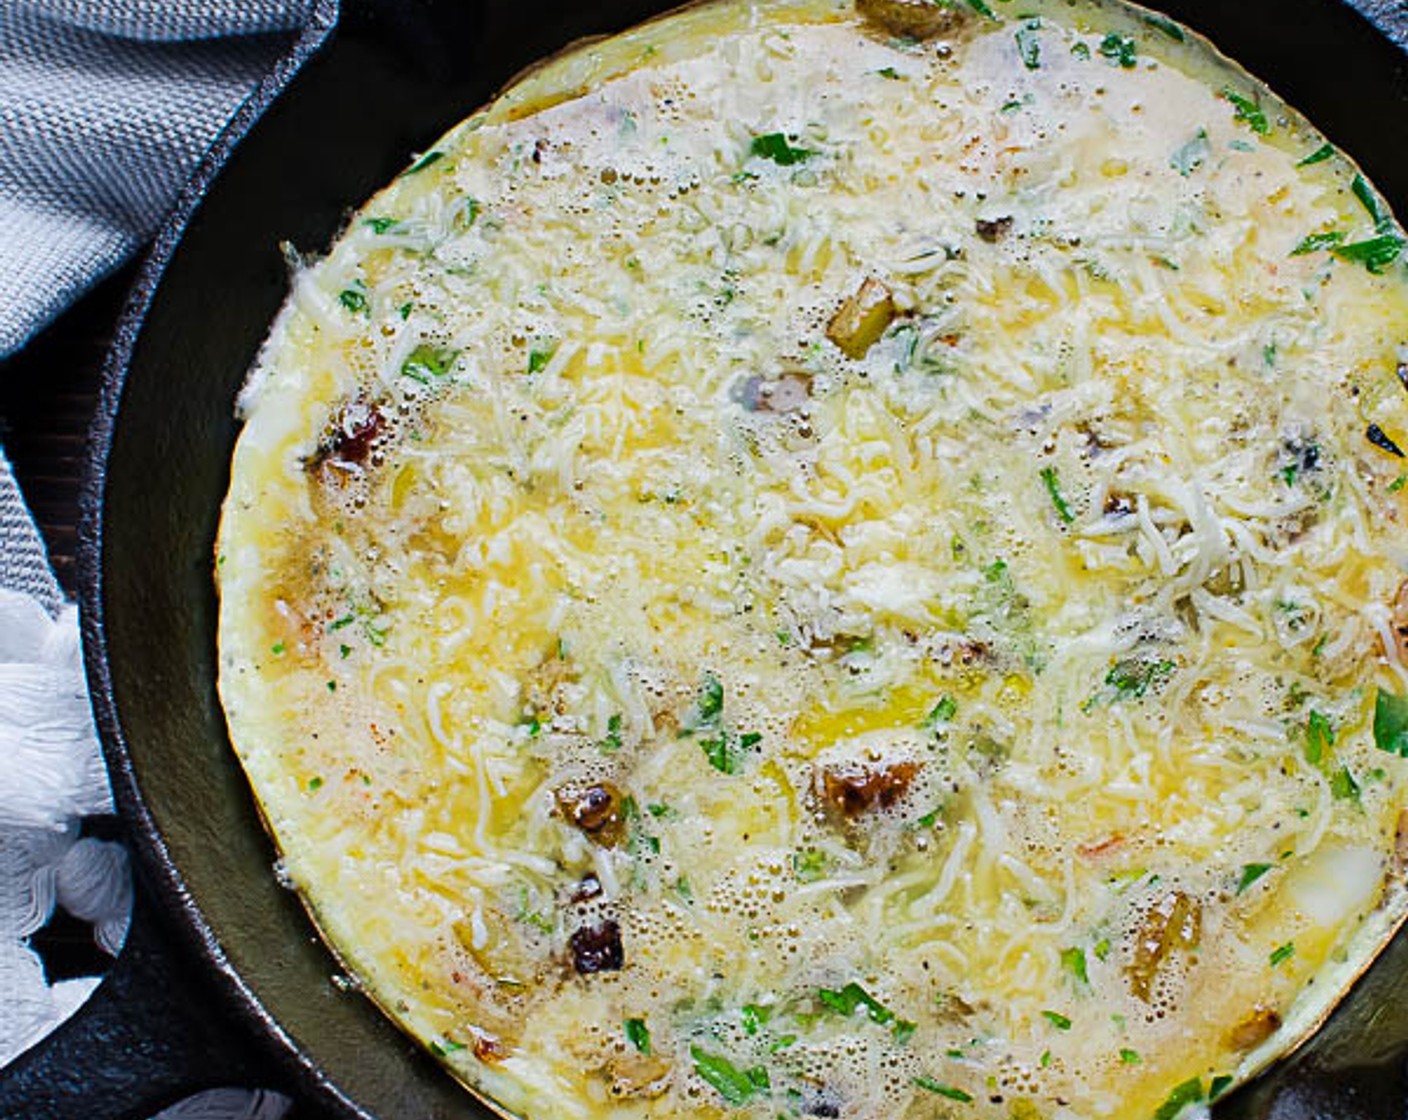 step 7 Transfer the skillet to the oven and bake for 3-5 minutes or until the top of the frittata is set.